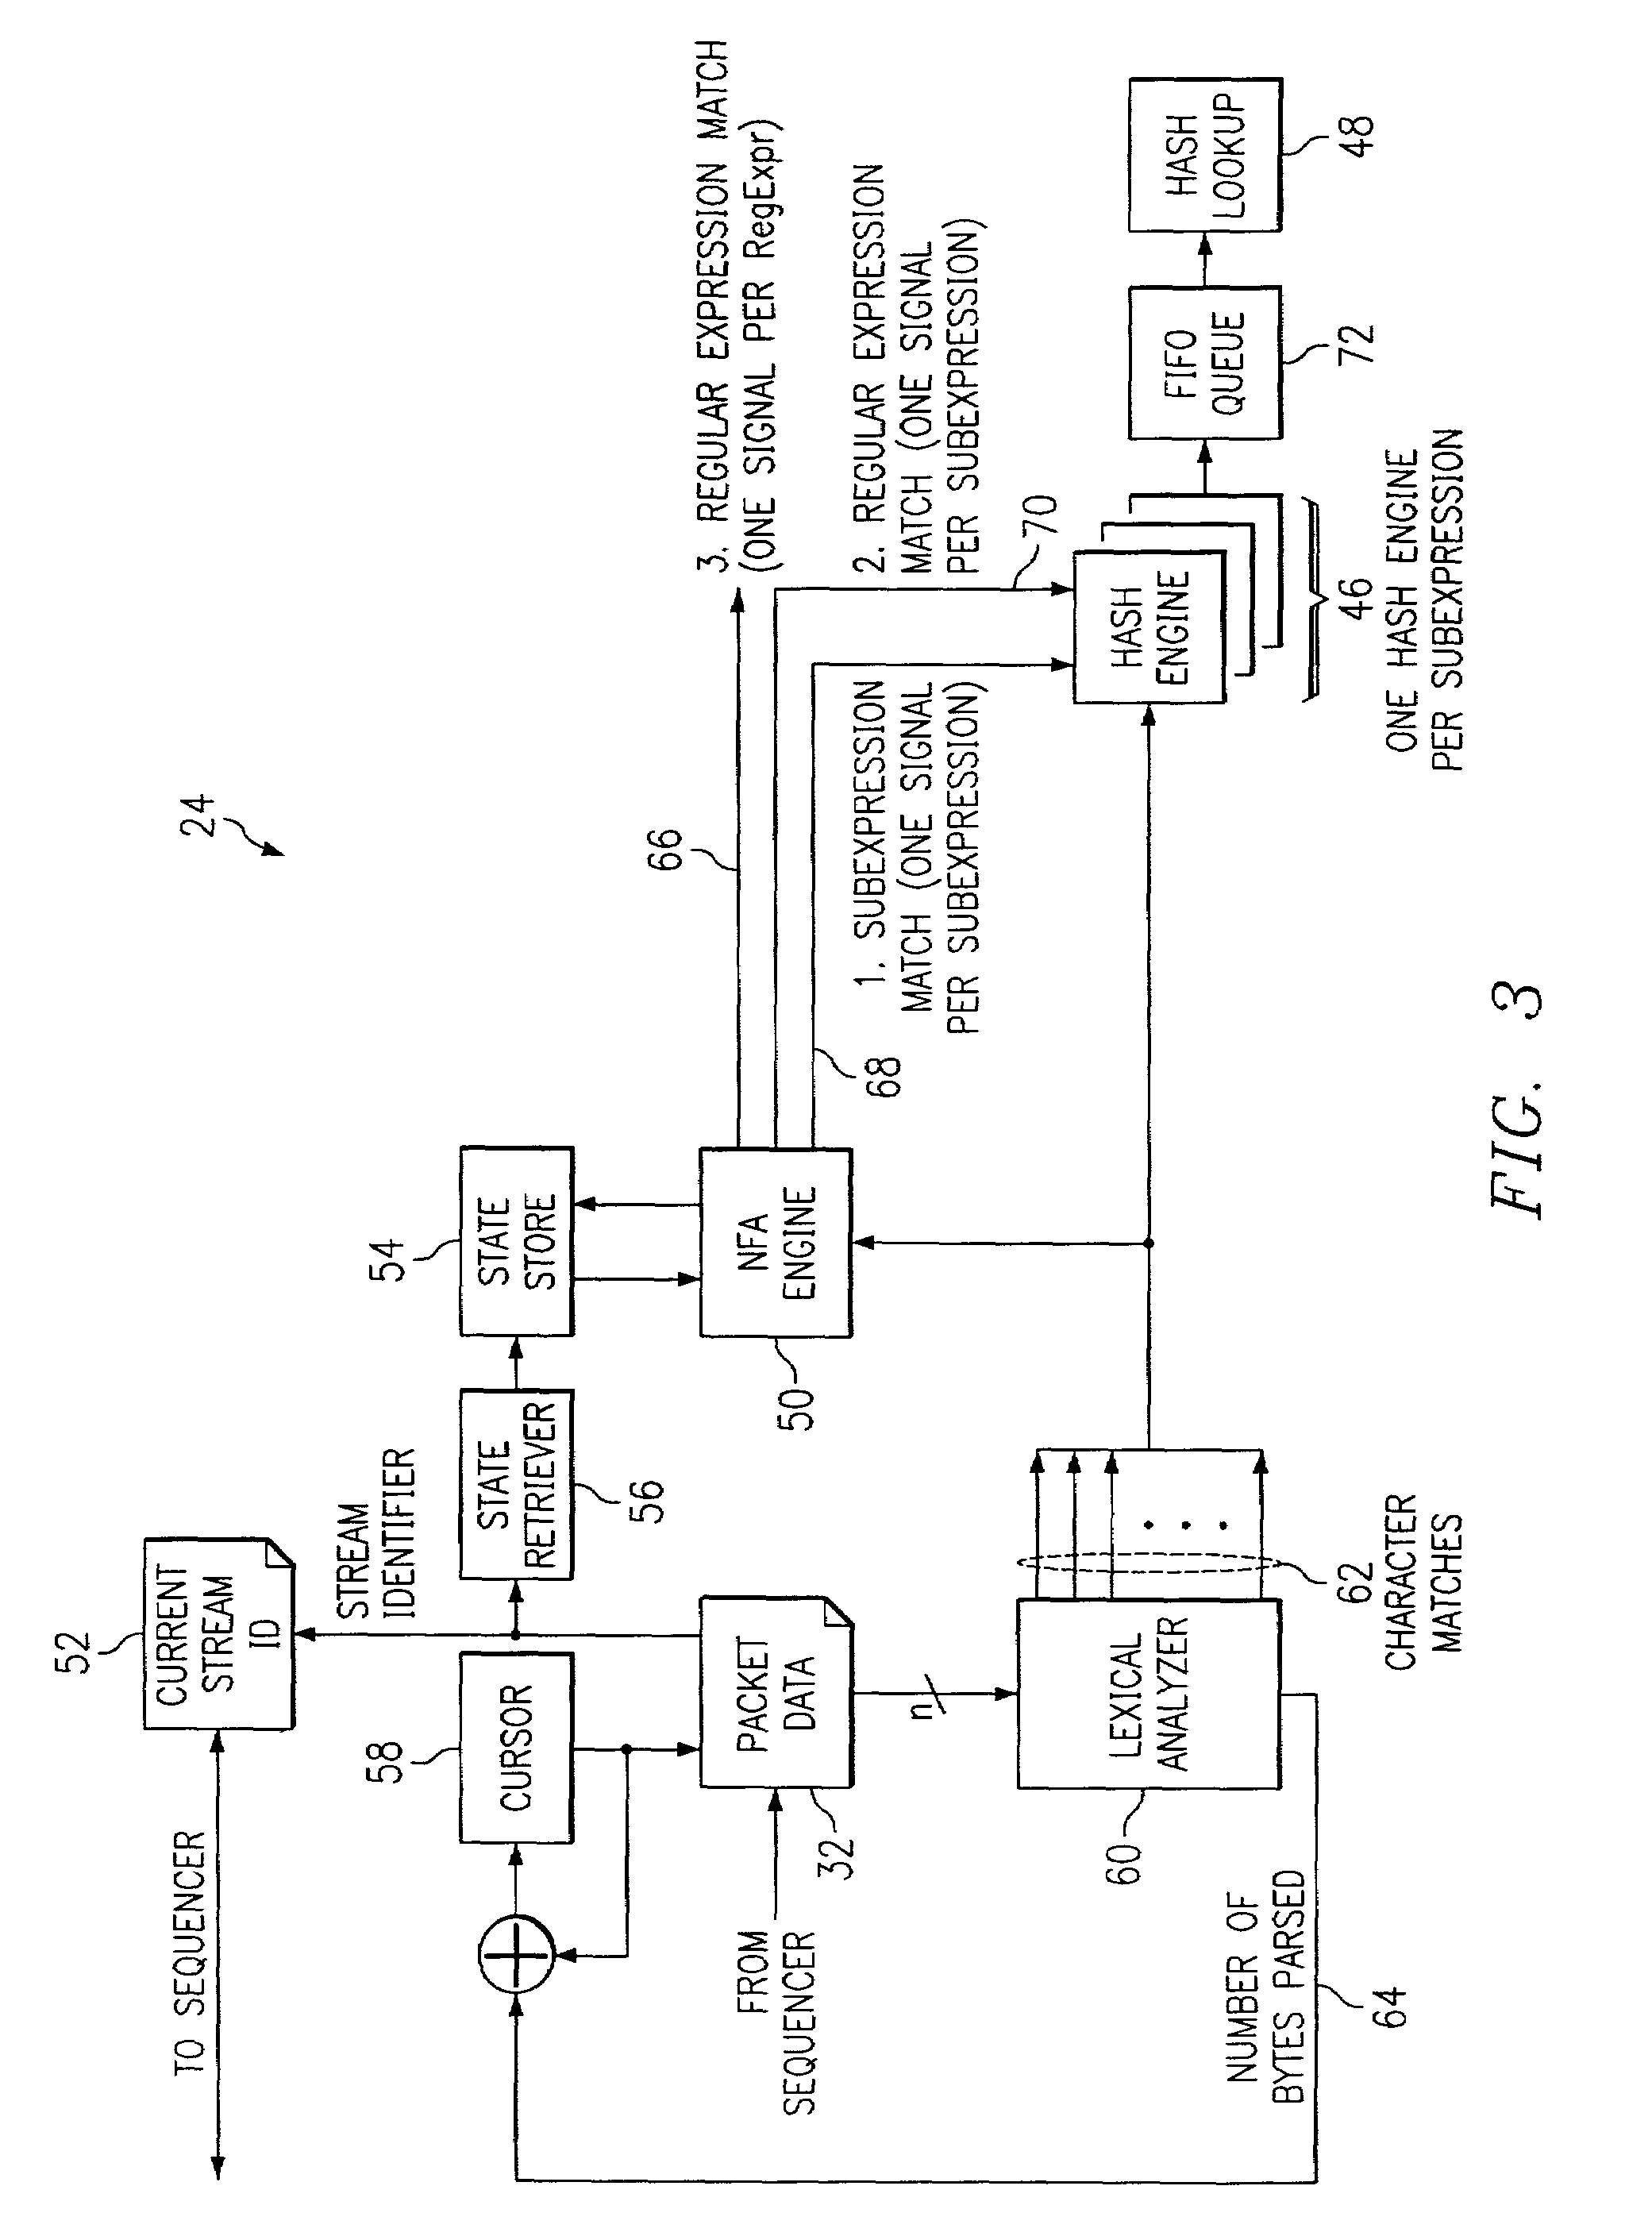 System and method for classifying network packets with packet content